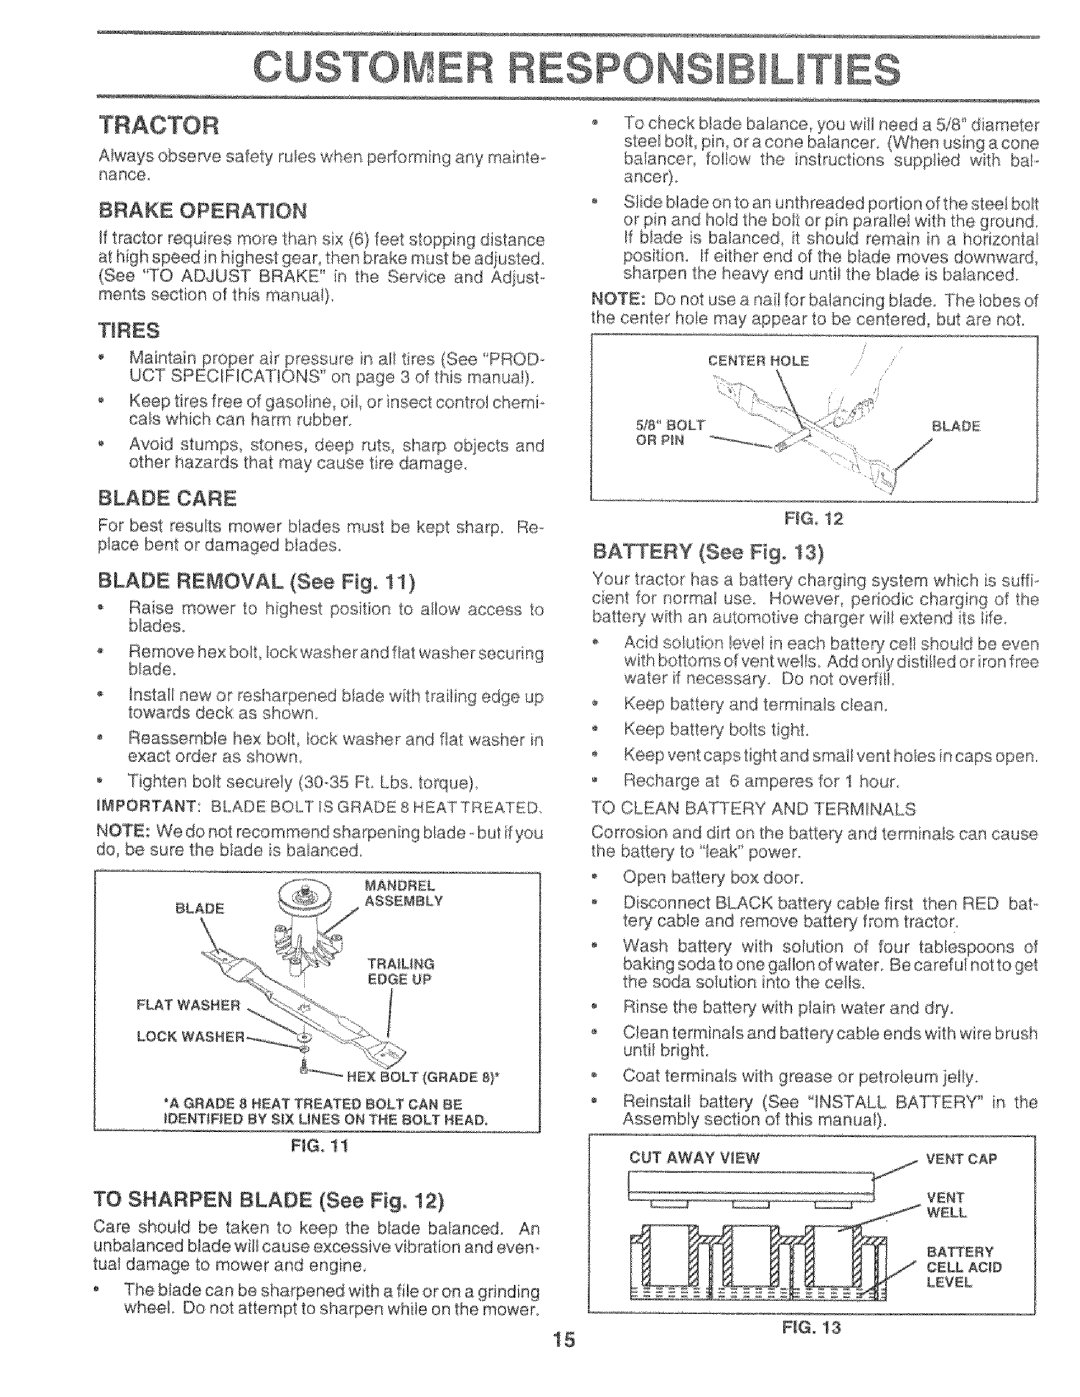 Sears 917.25759 manual Brake Operation, Blade Care, BLADE REMOVAL See Fig, BATTERY See Fig, TO SHARPEN BLADE See Fig 